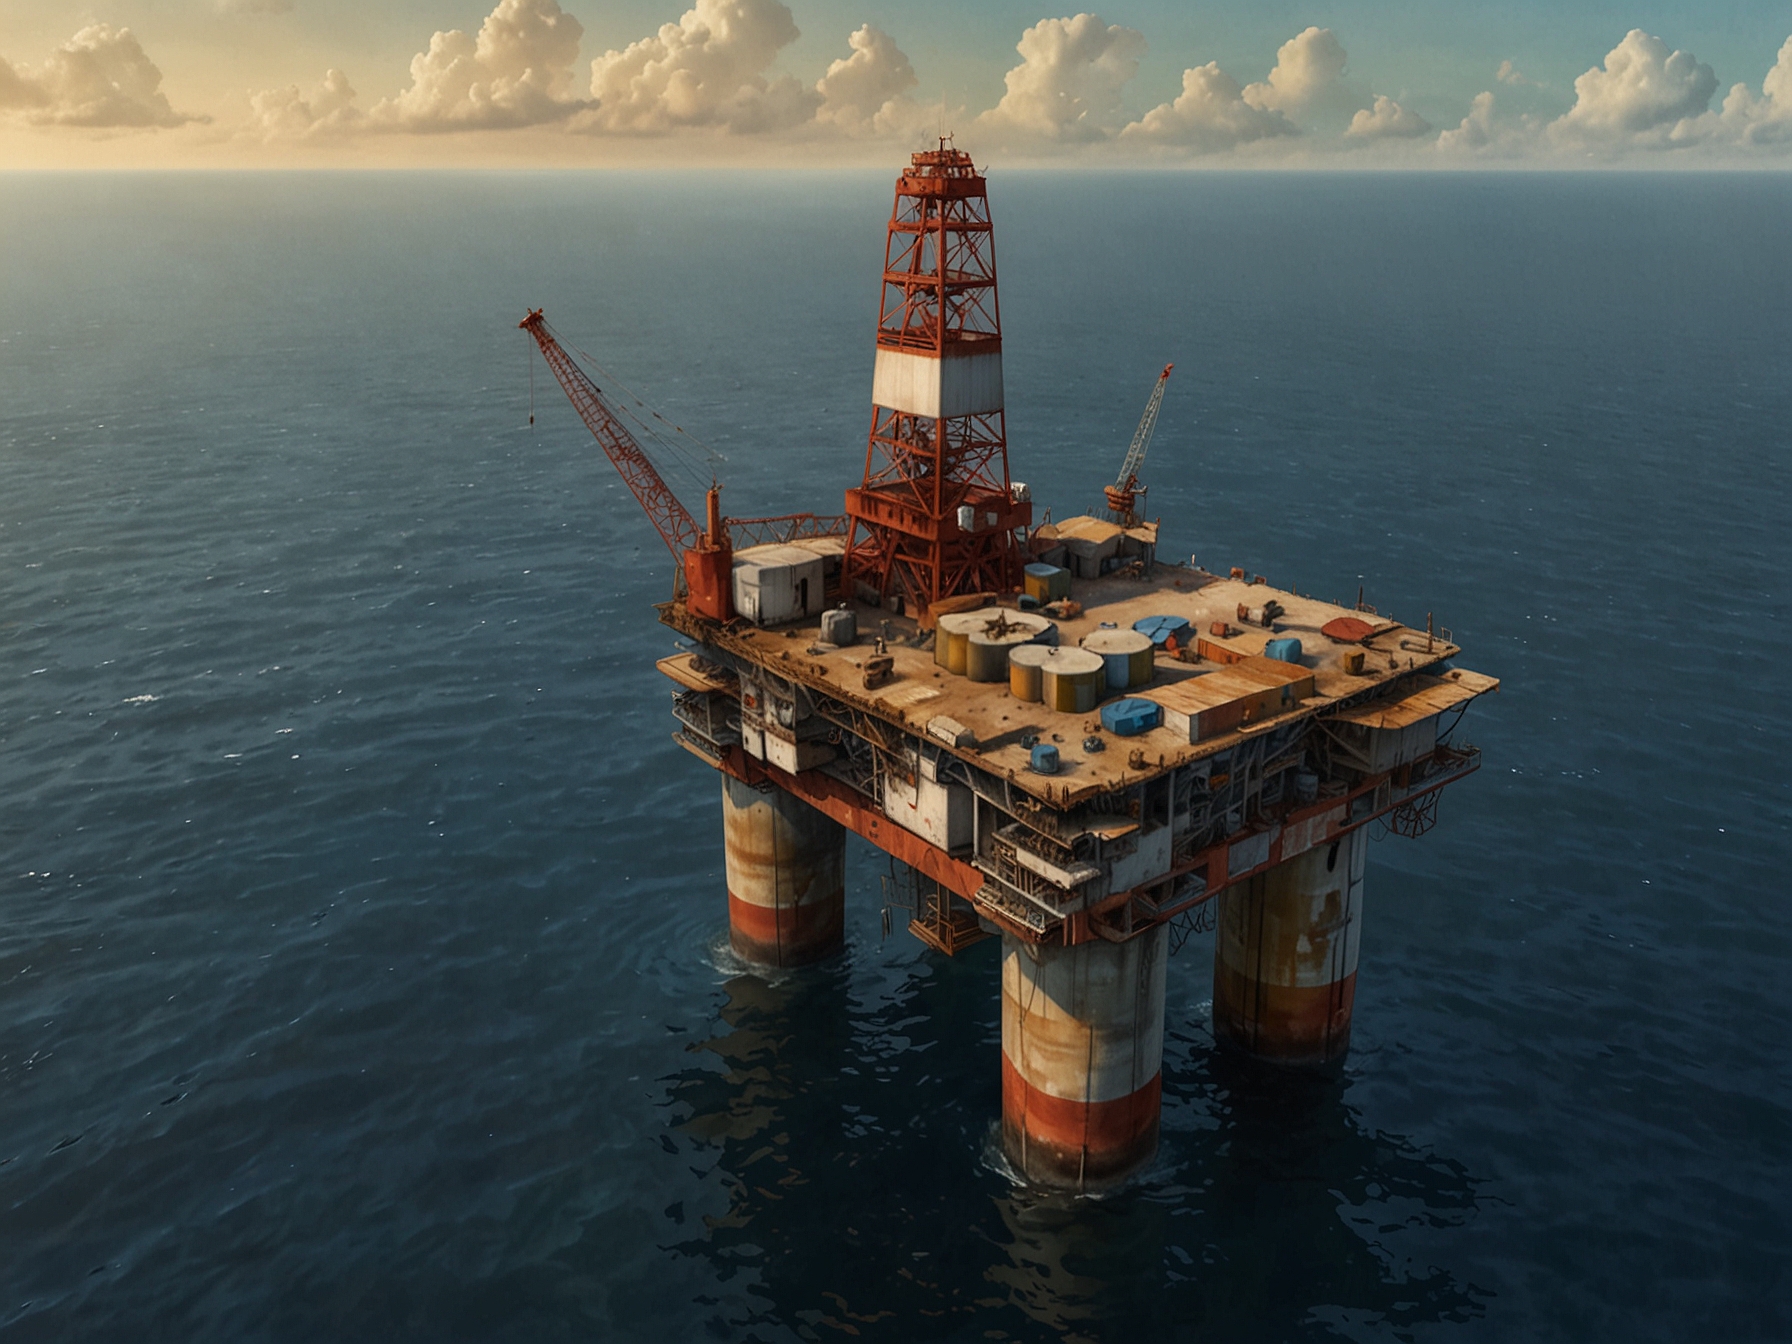 An aerial view of an oil rig off the coast of Cote d'Ivoire, symbolizing the nation's anticipated oil production boom and the strategic importance of its new discoveries.